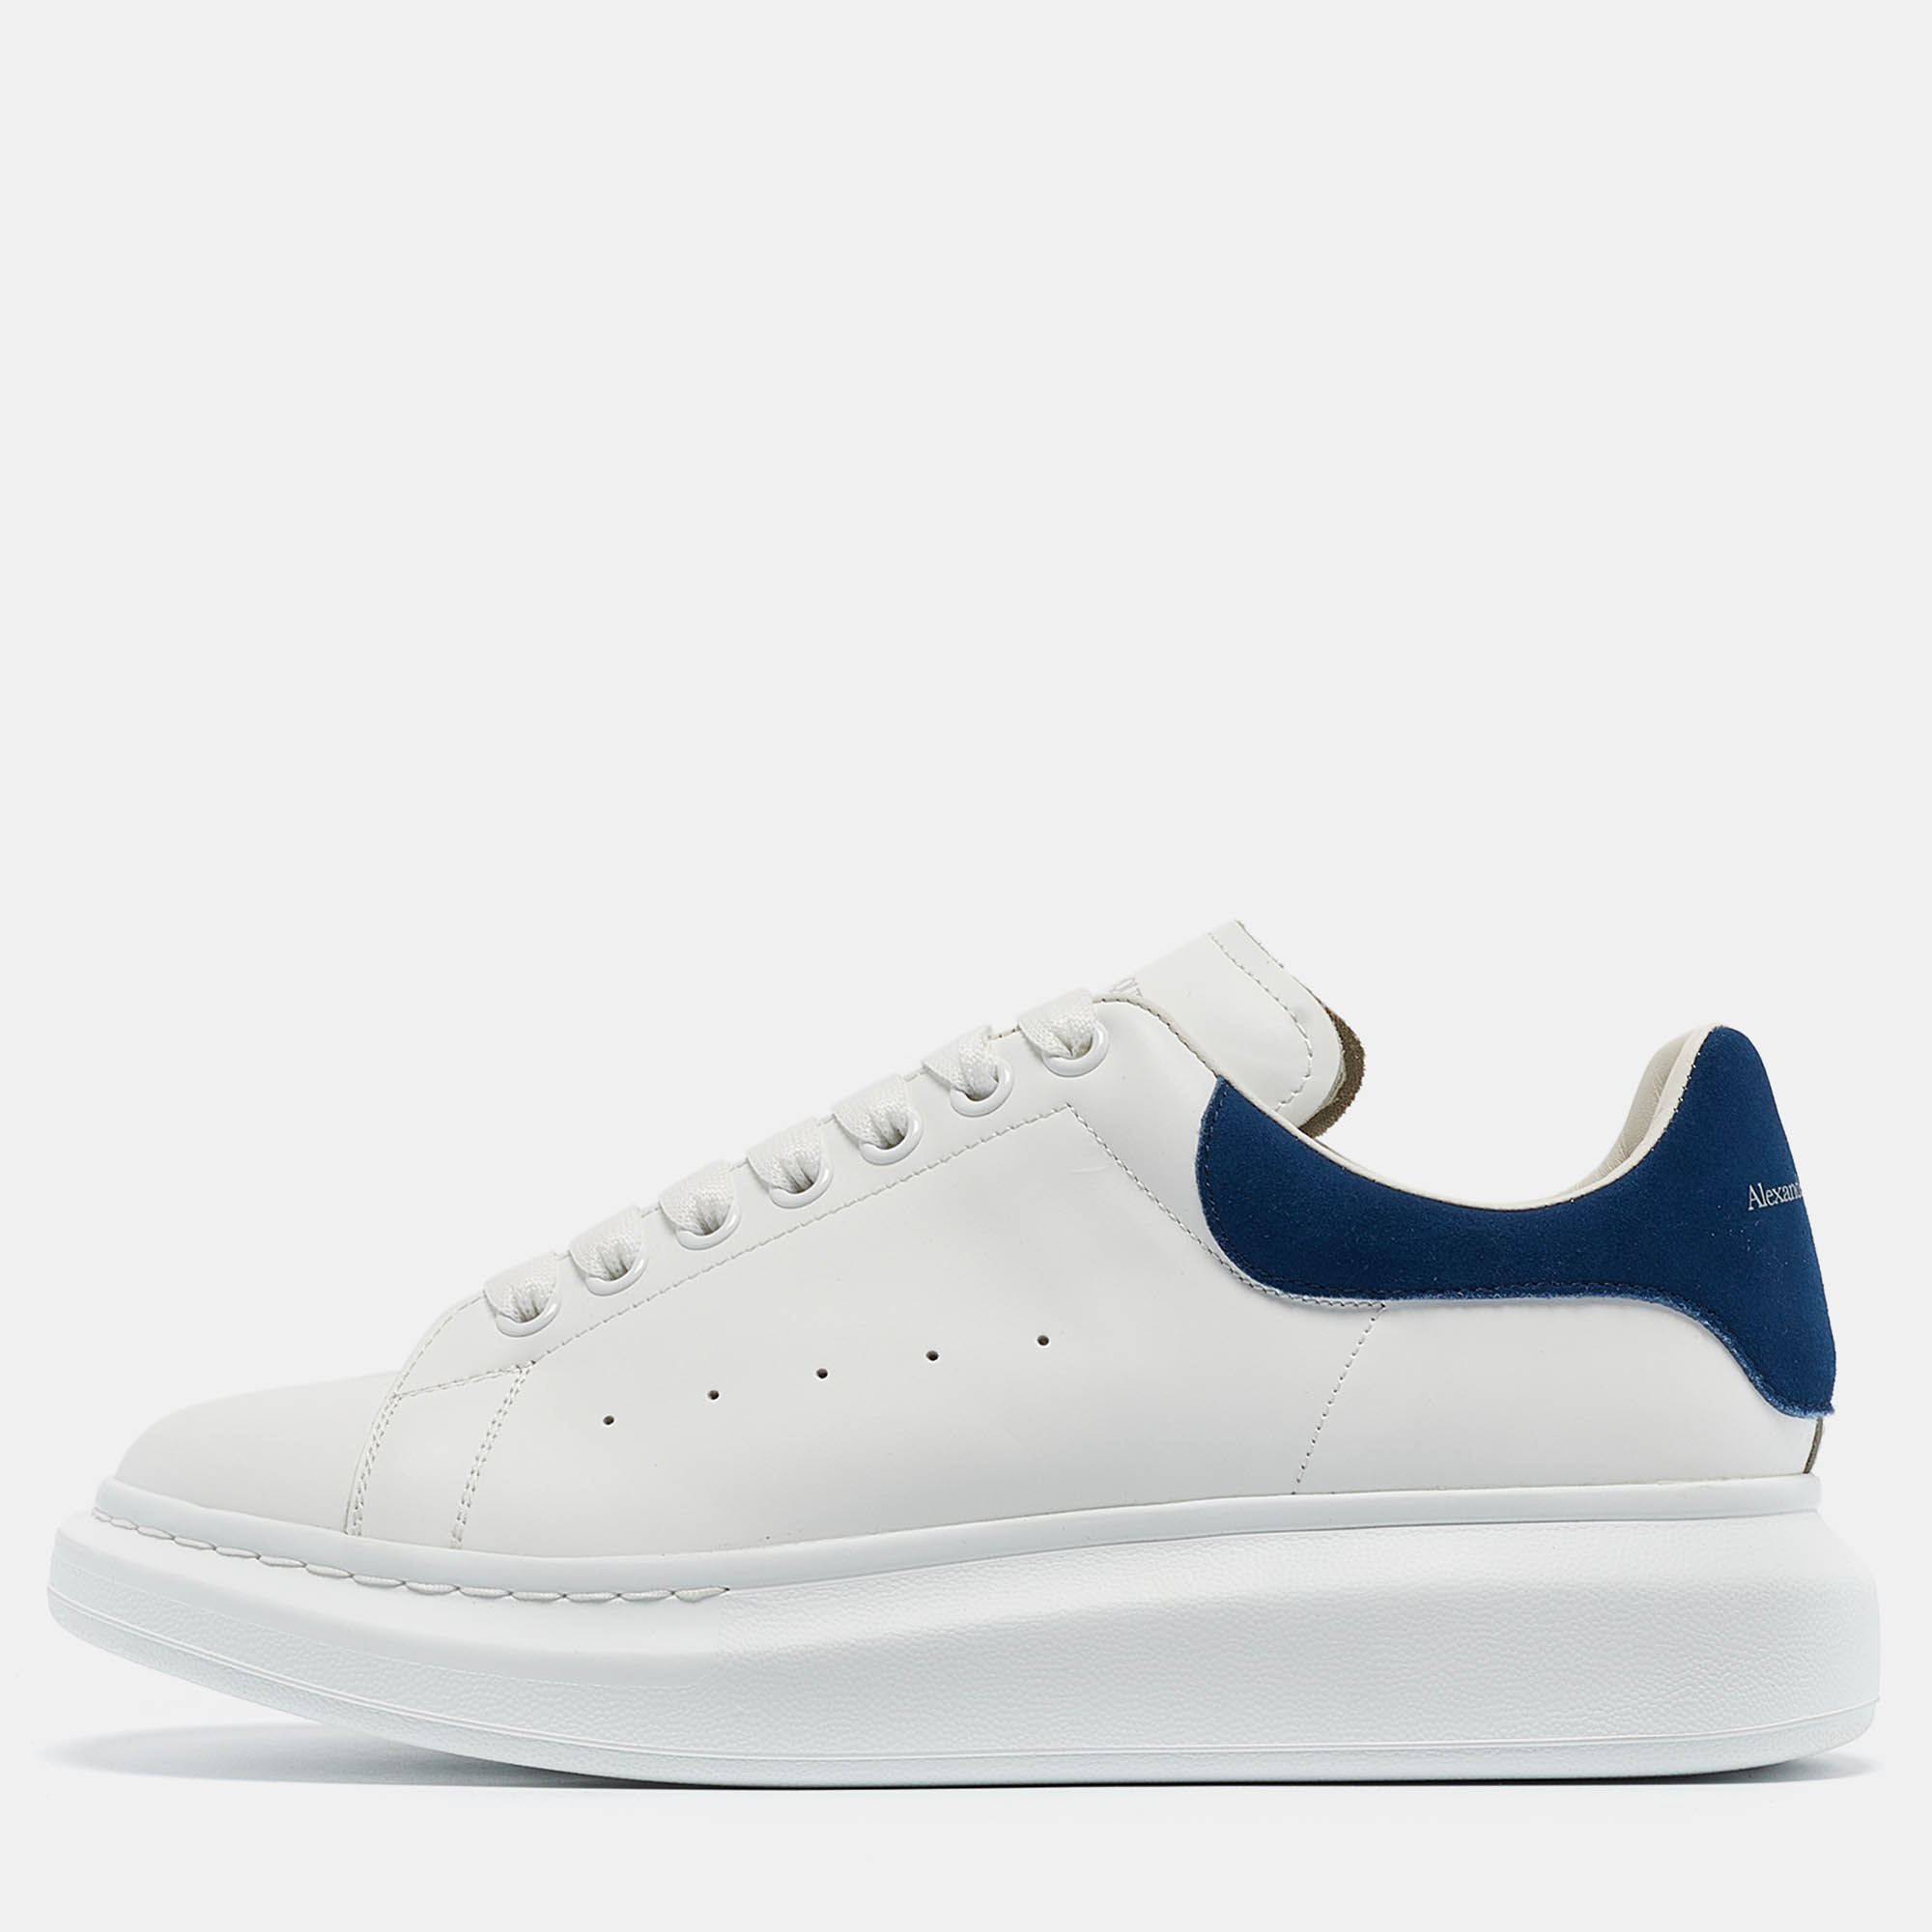 

Alexander McQueen White/Blue Leather and Suede Oversized Sneakers Size